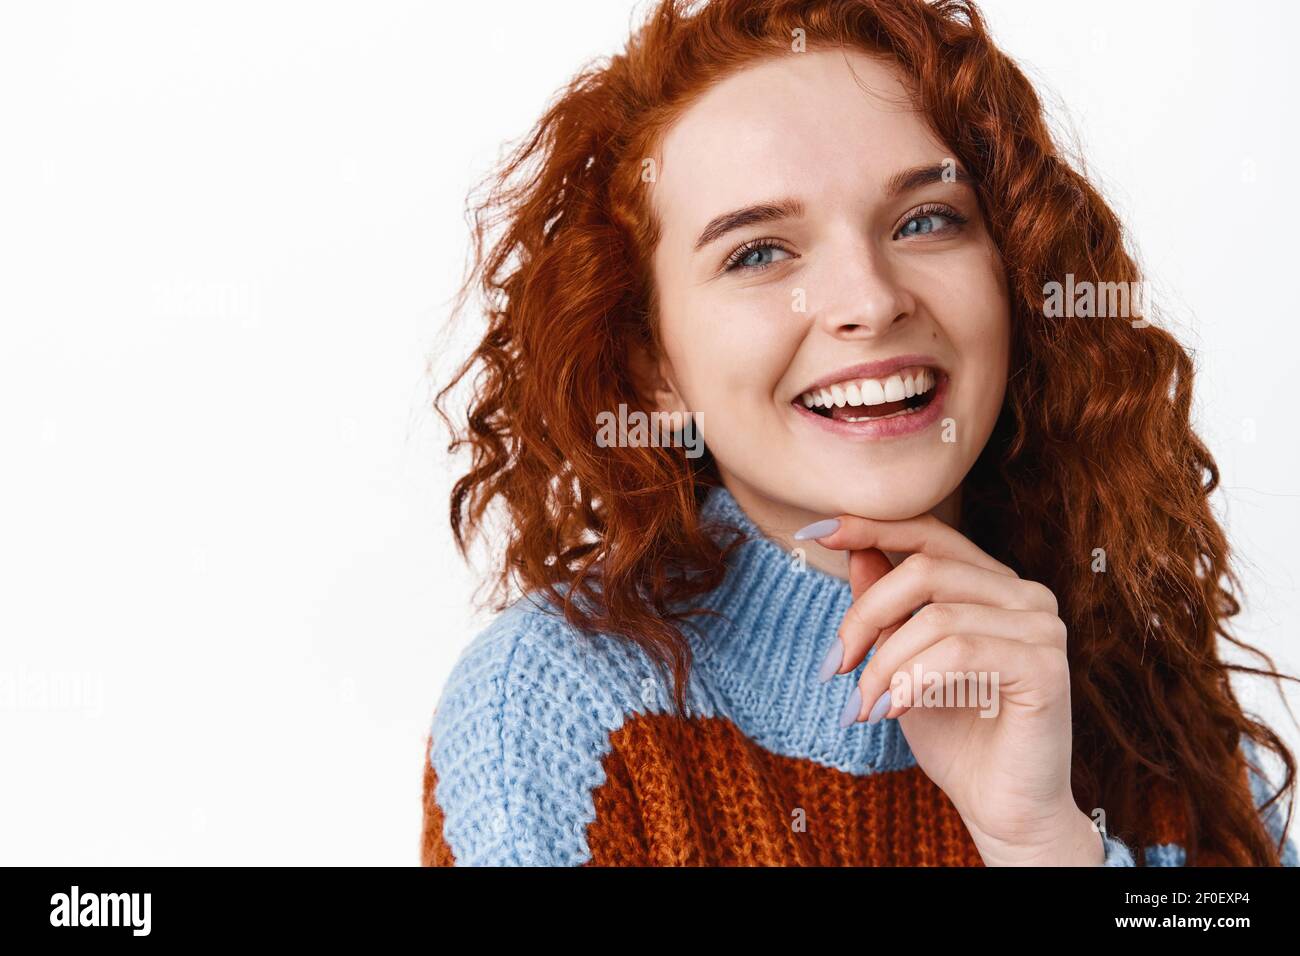 Close up portrait of redhead woman with curly natural healthy hair and pale smooth skin, touching clean and fresh face, smiling and laughing while Stock Photo